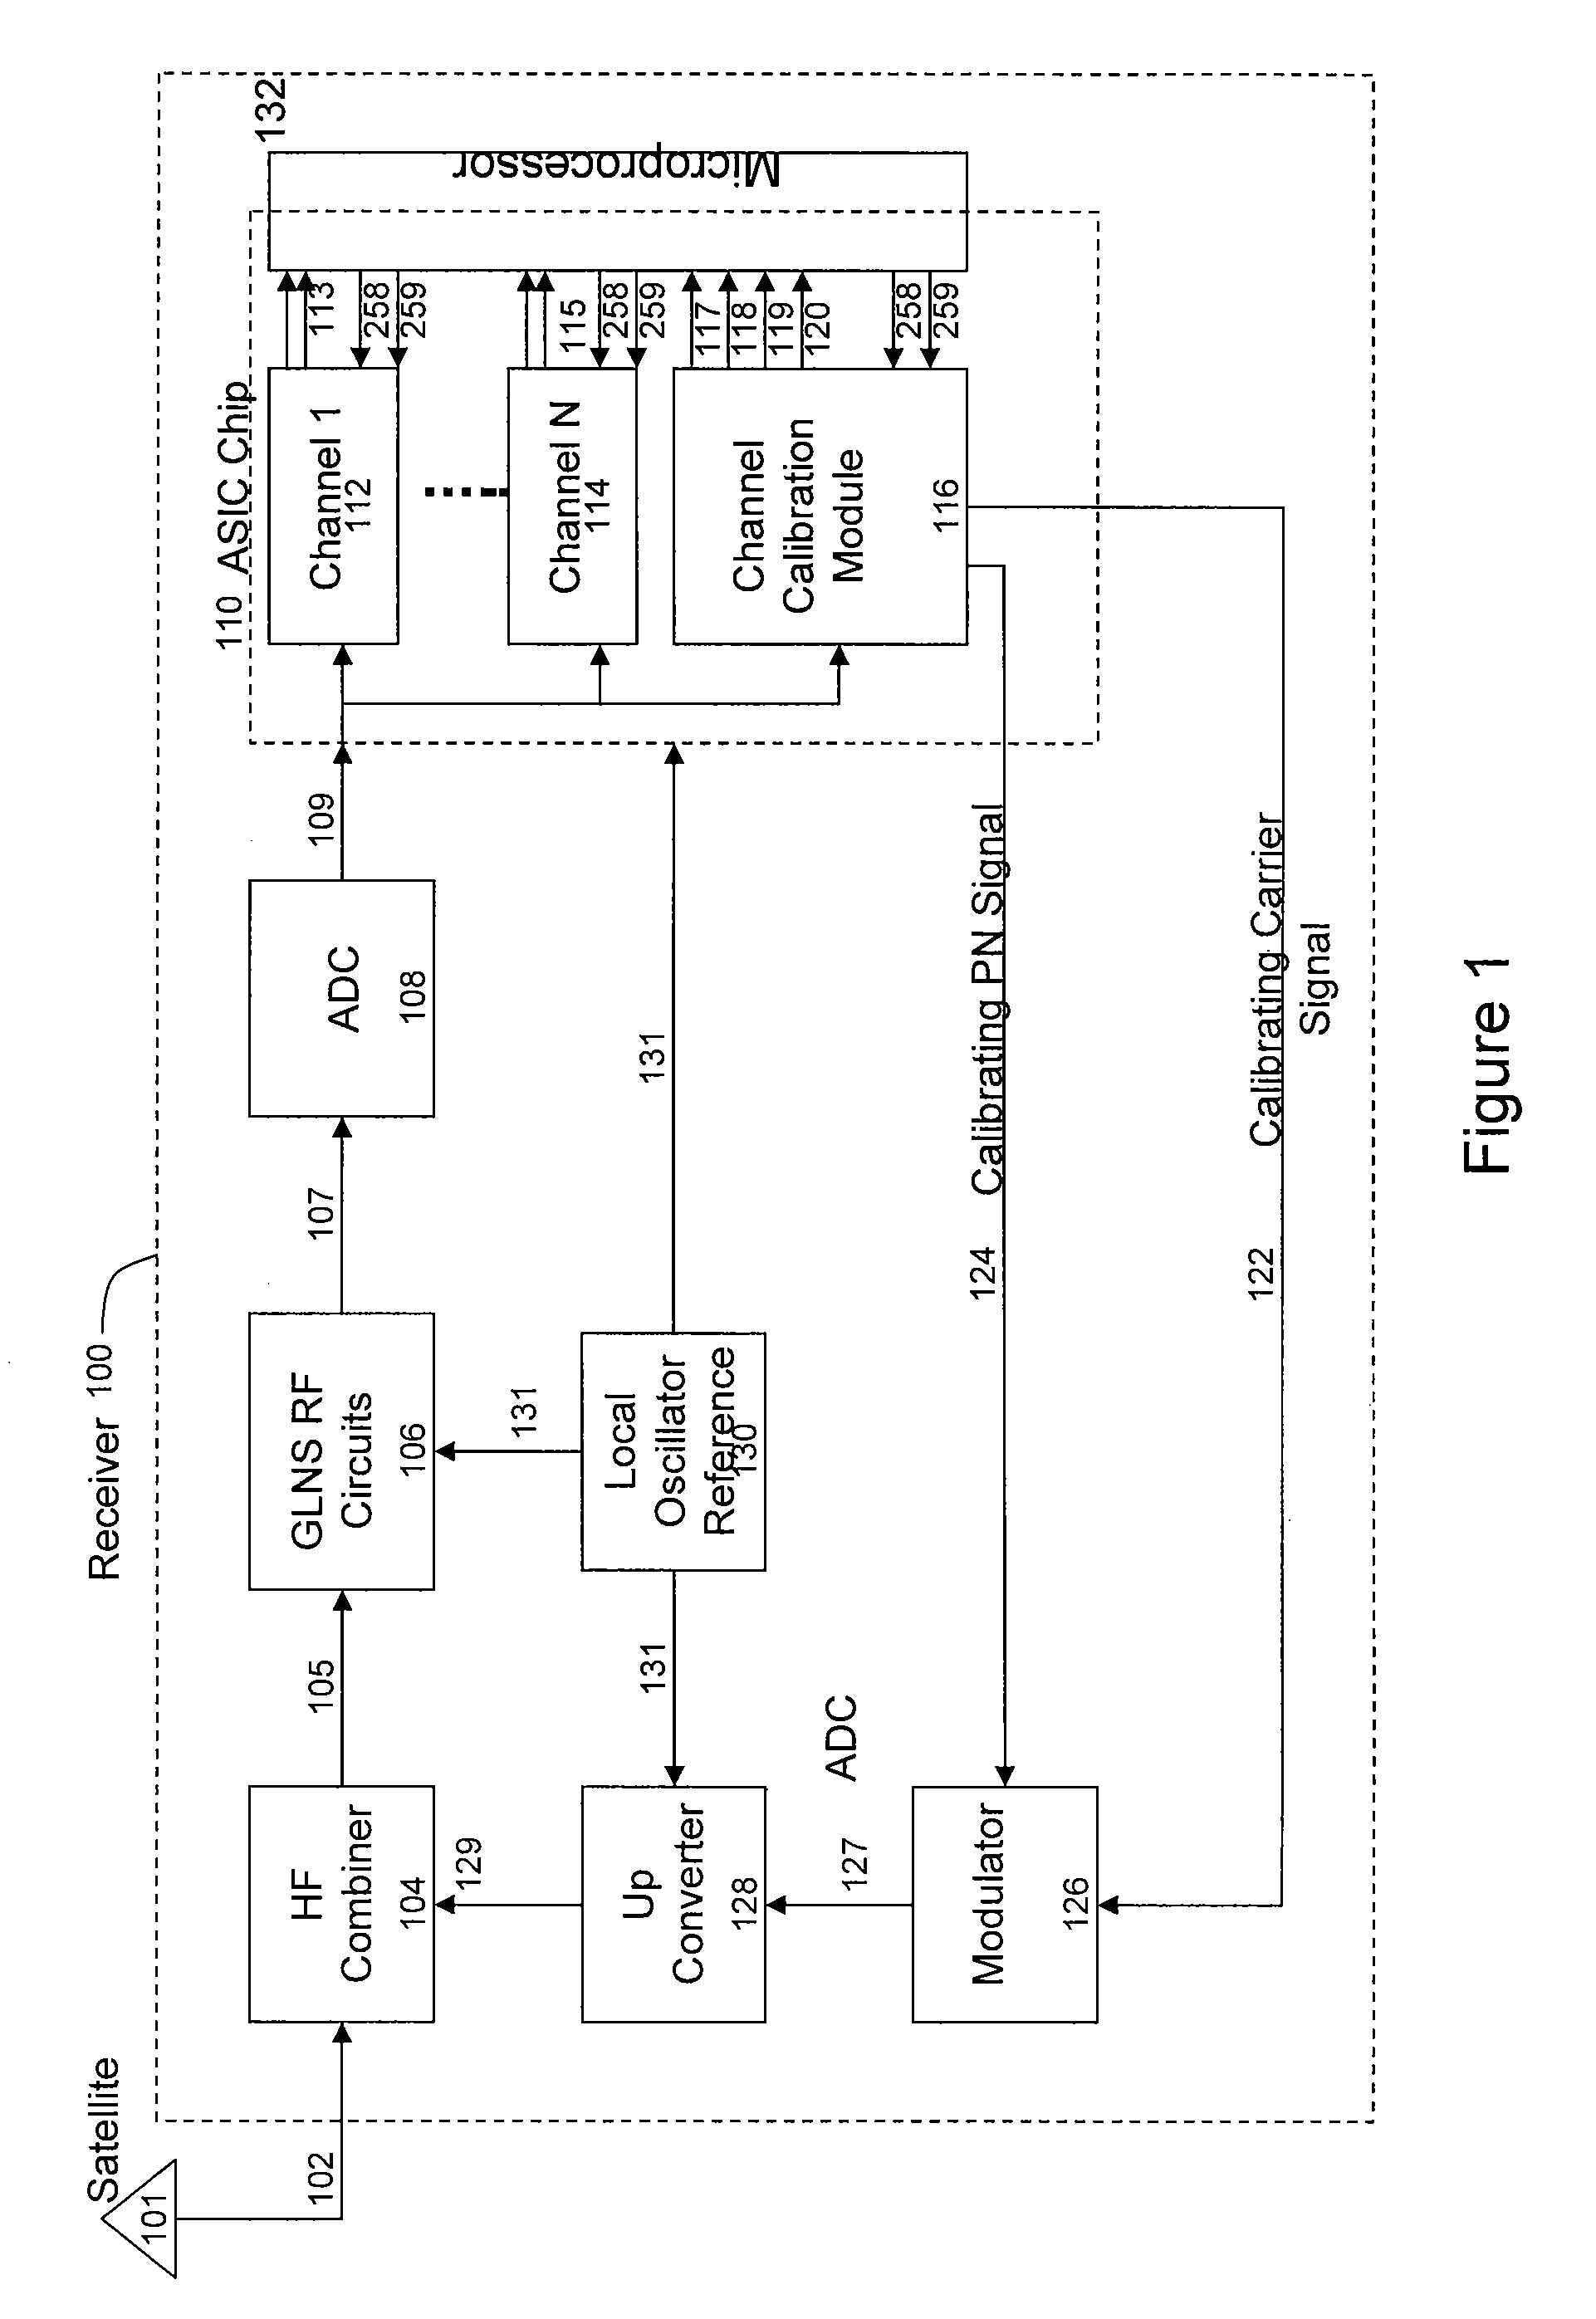 Inter-channel bias calibration for navigation satellite systems